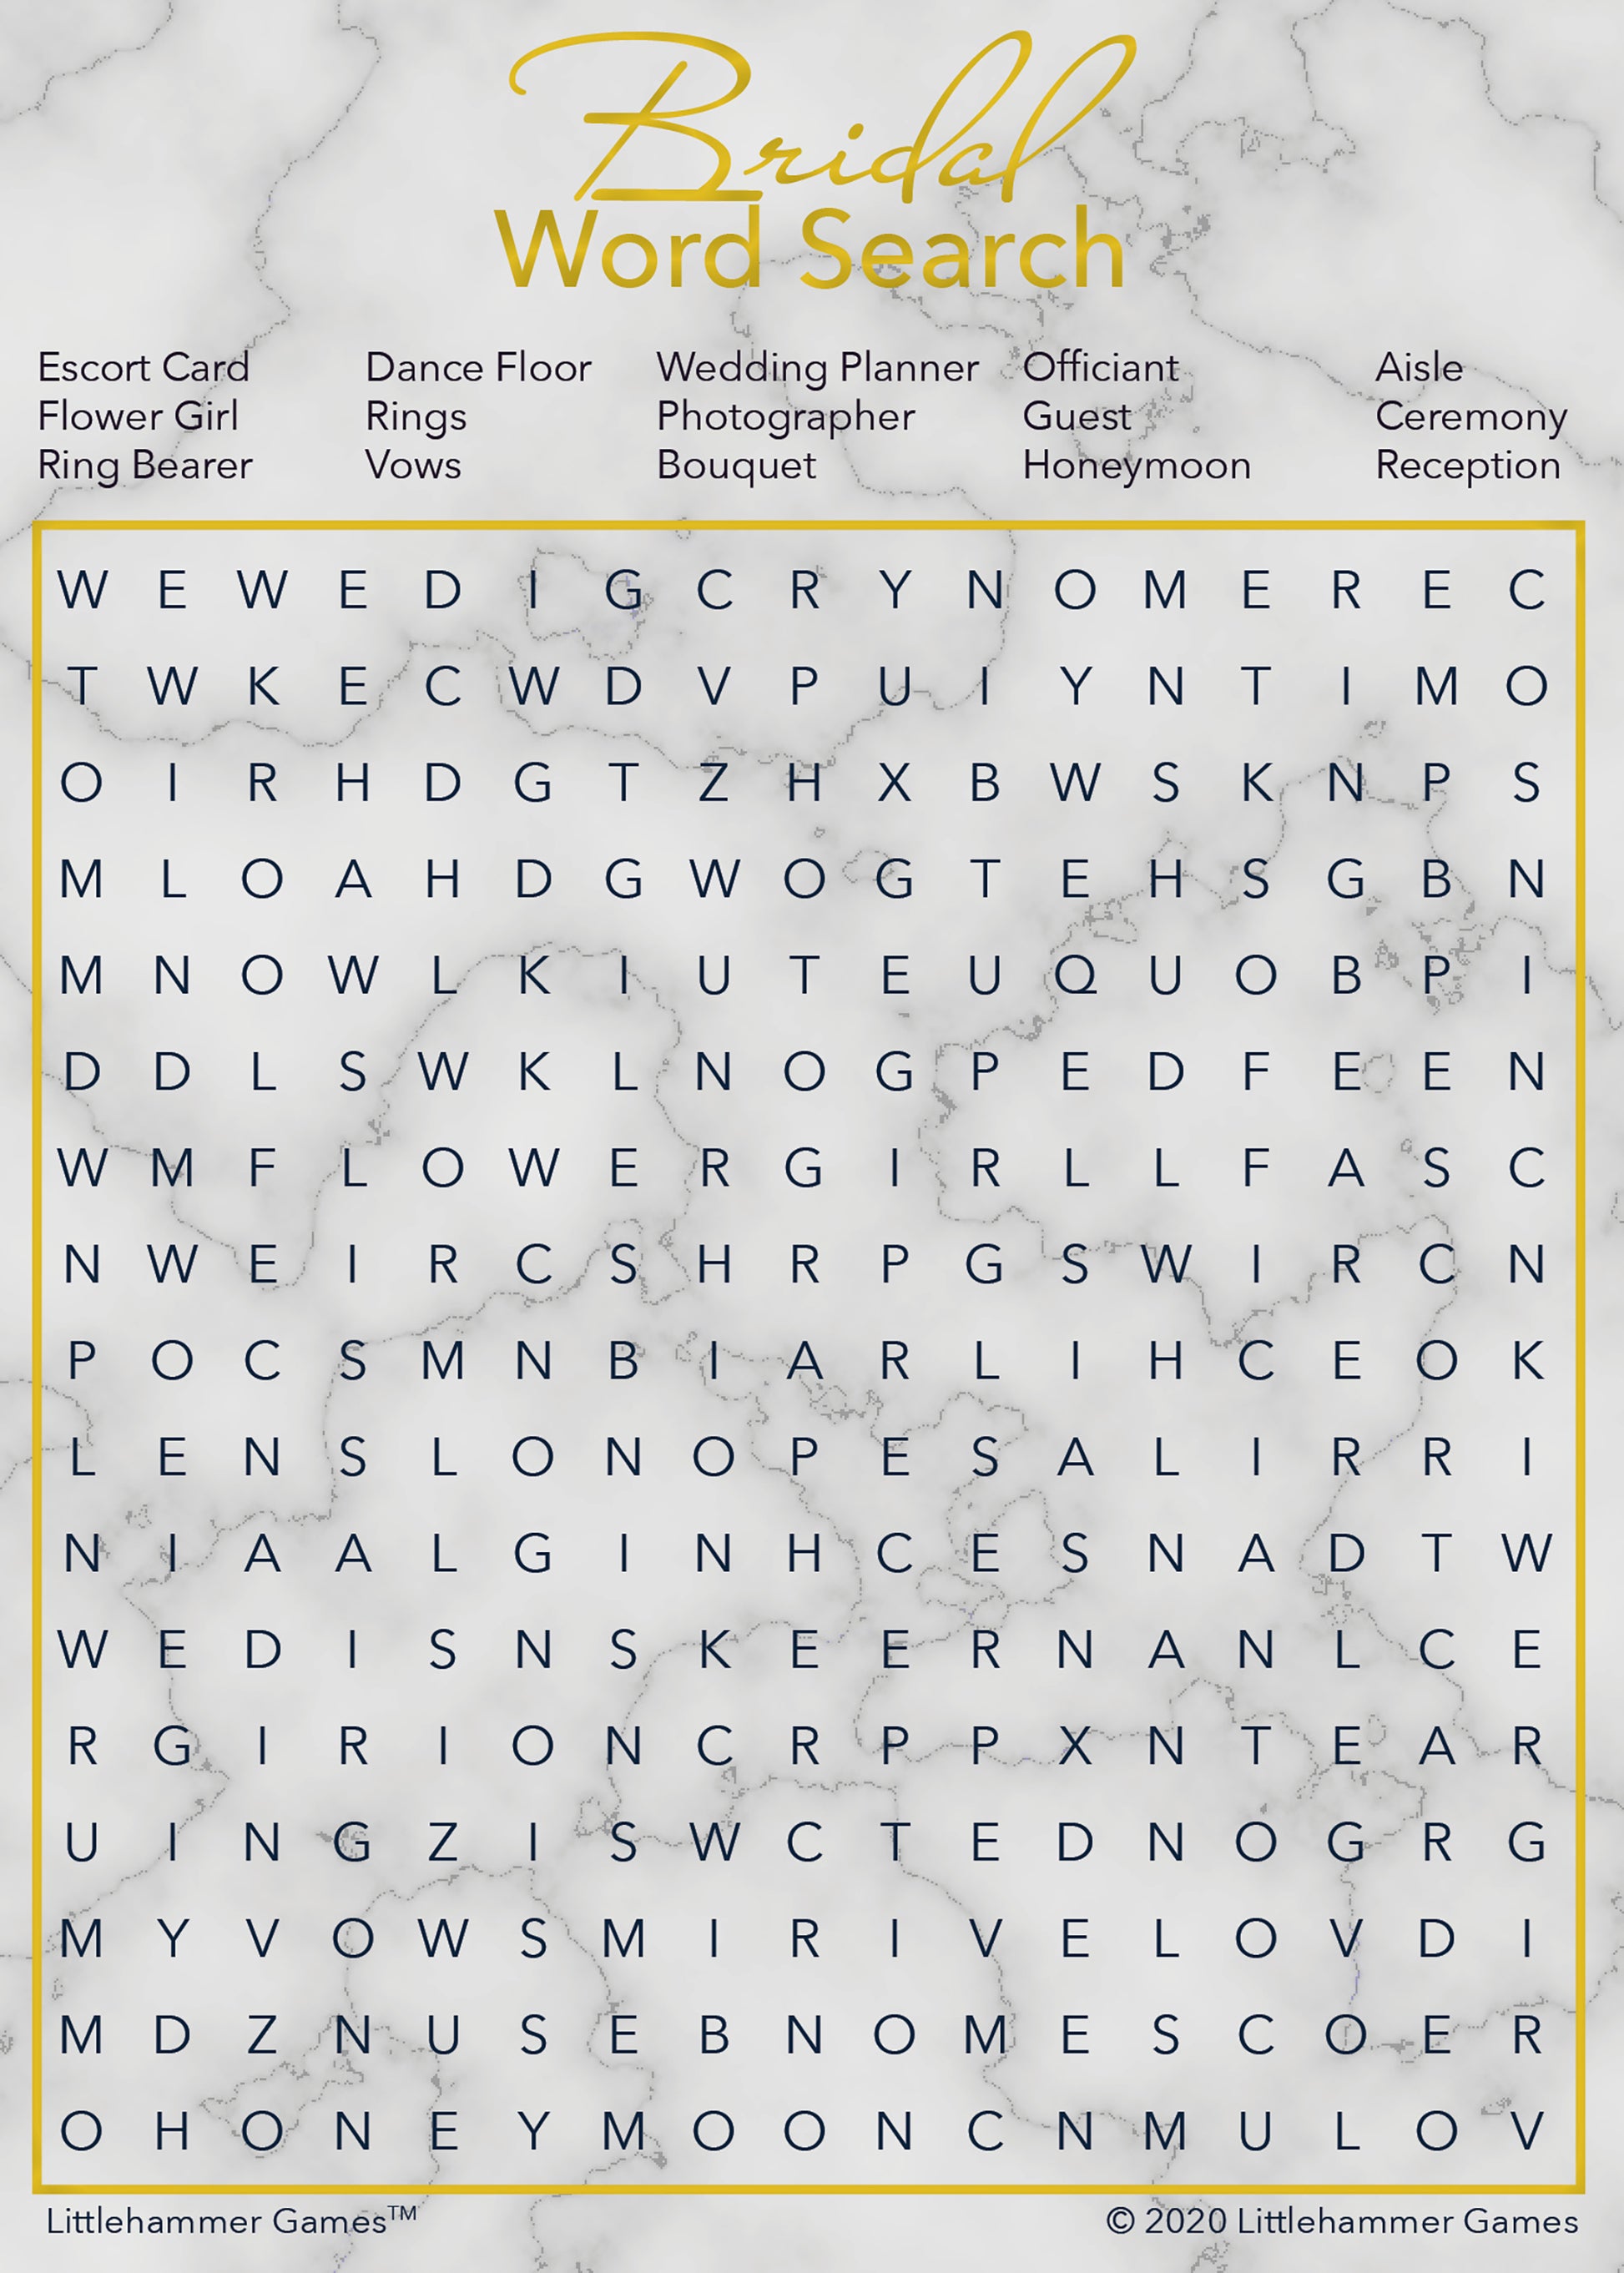 Bridal Word Search game card with a gold and marble background